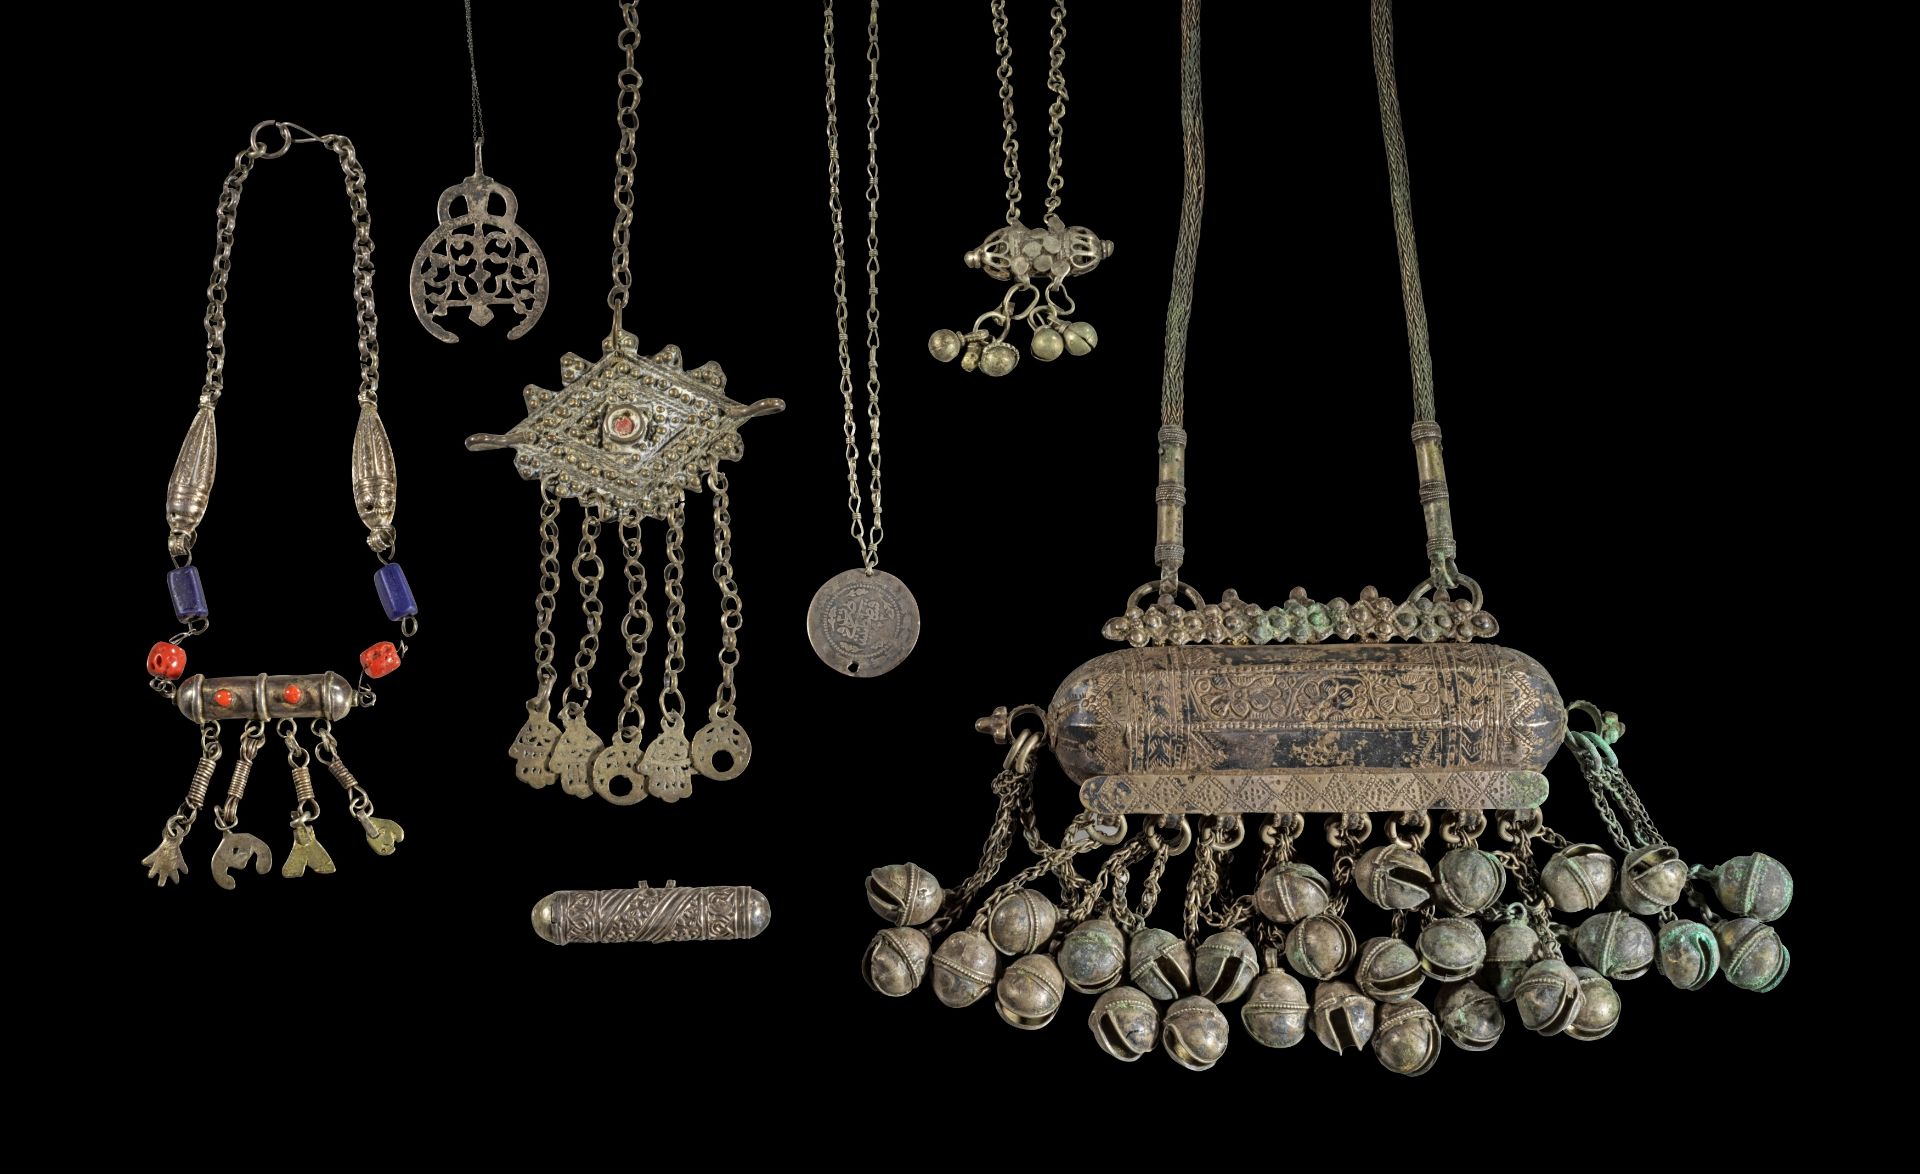 Collection of amulets and amulet containers from Yemen and Saudi Arabia.